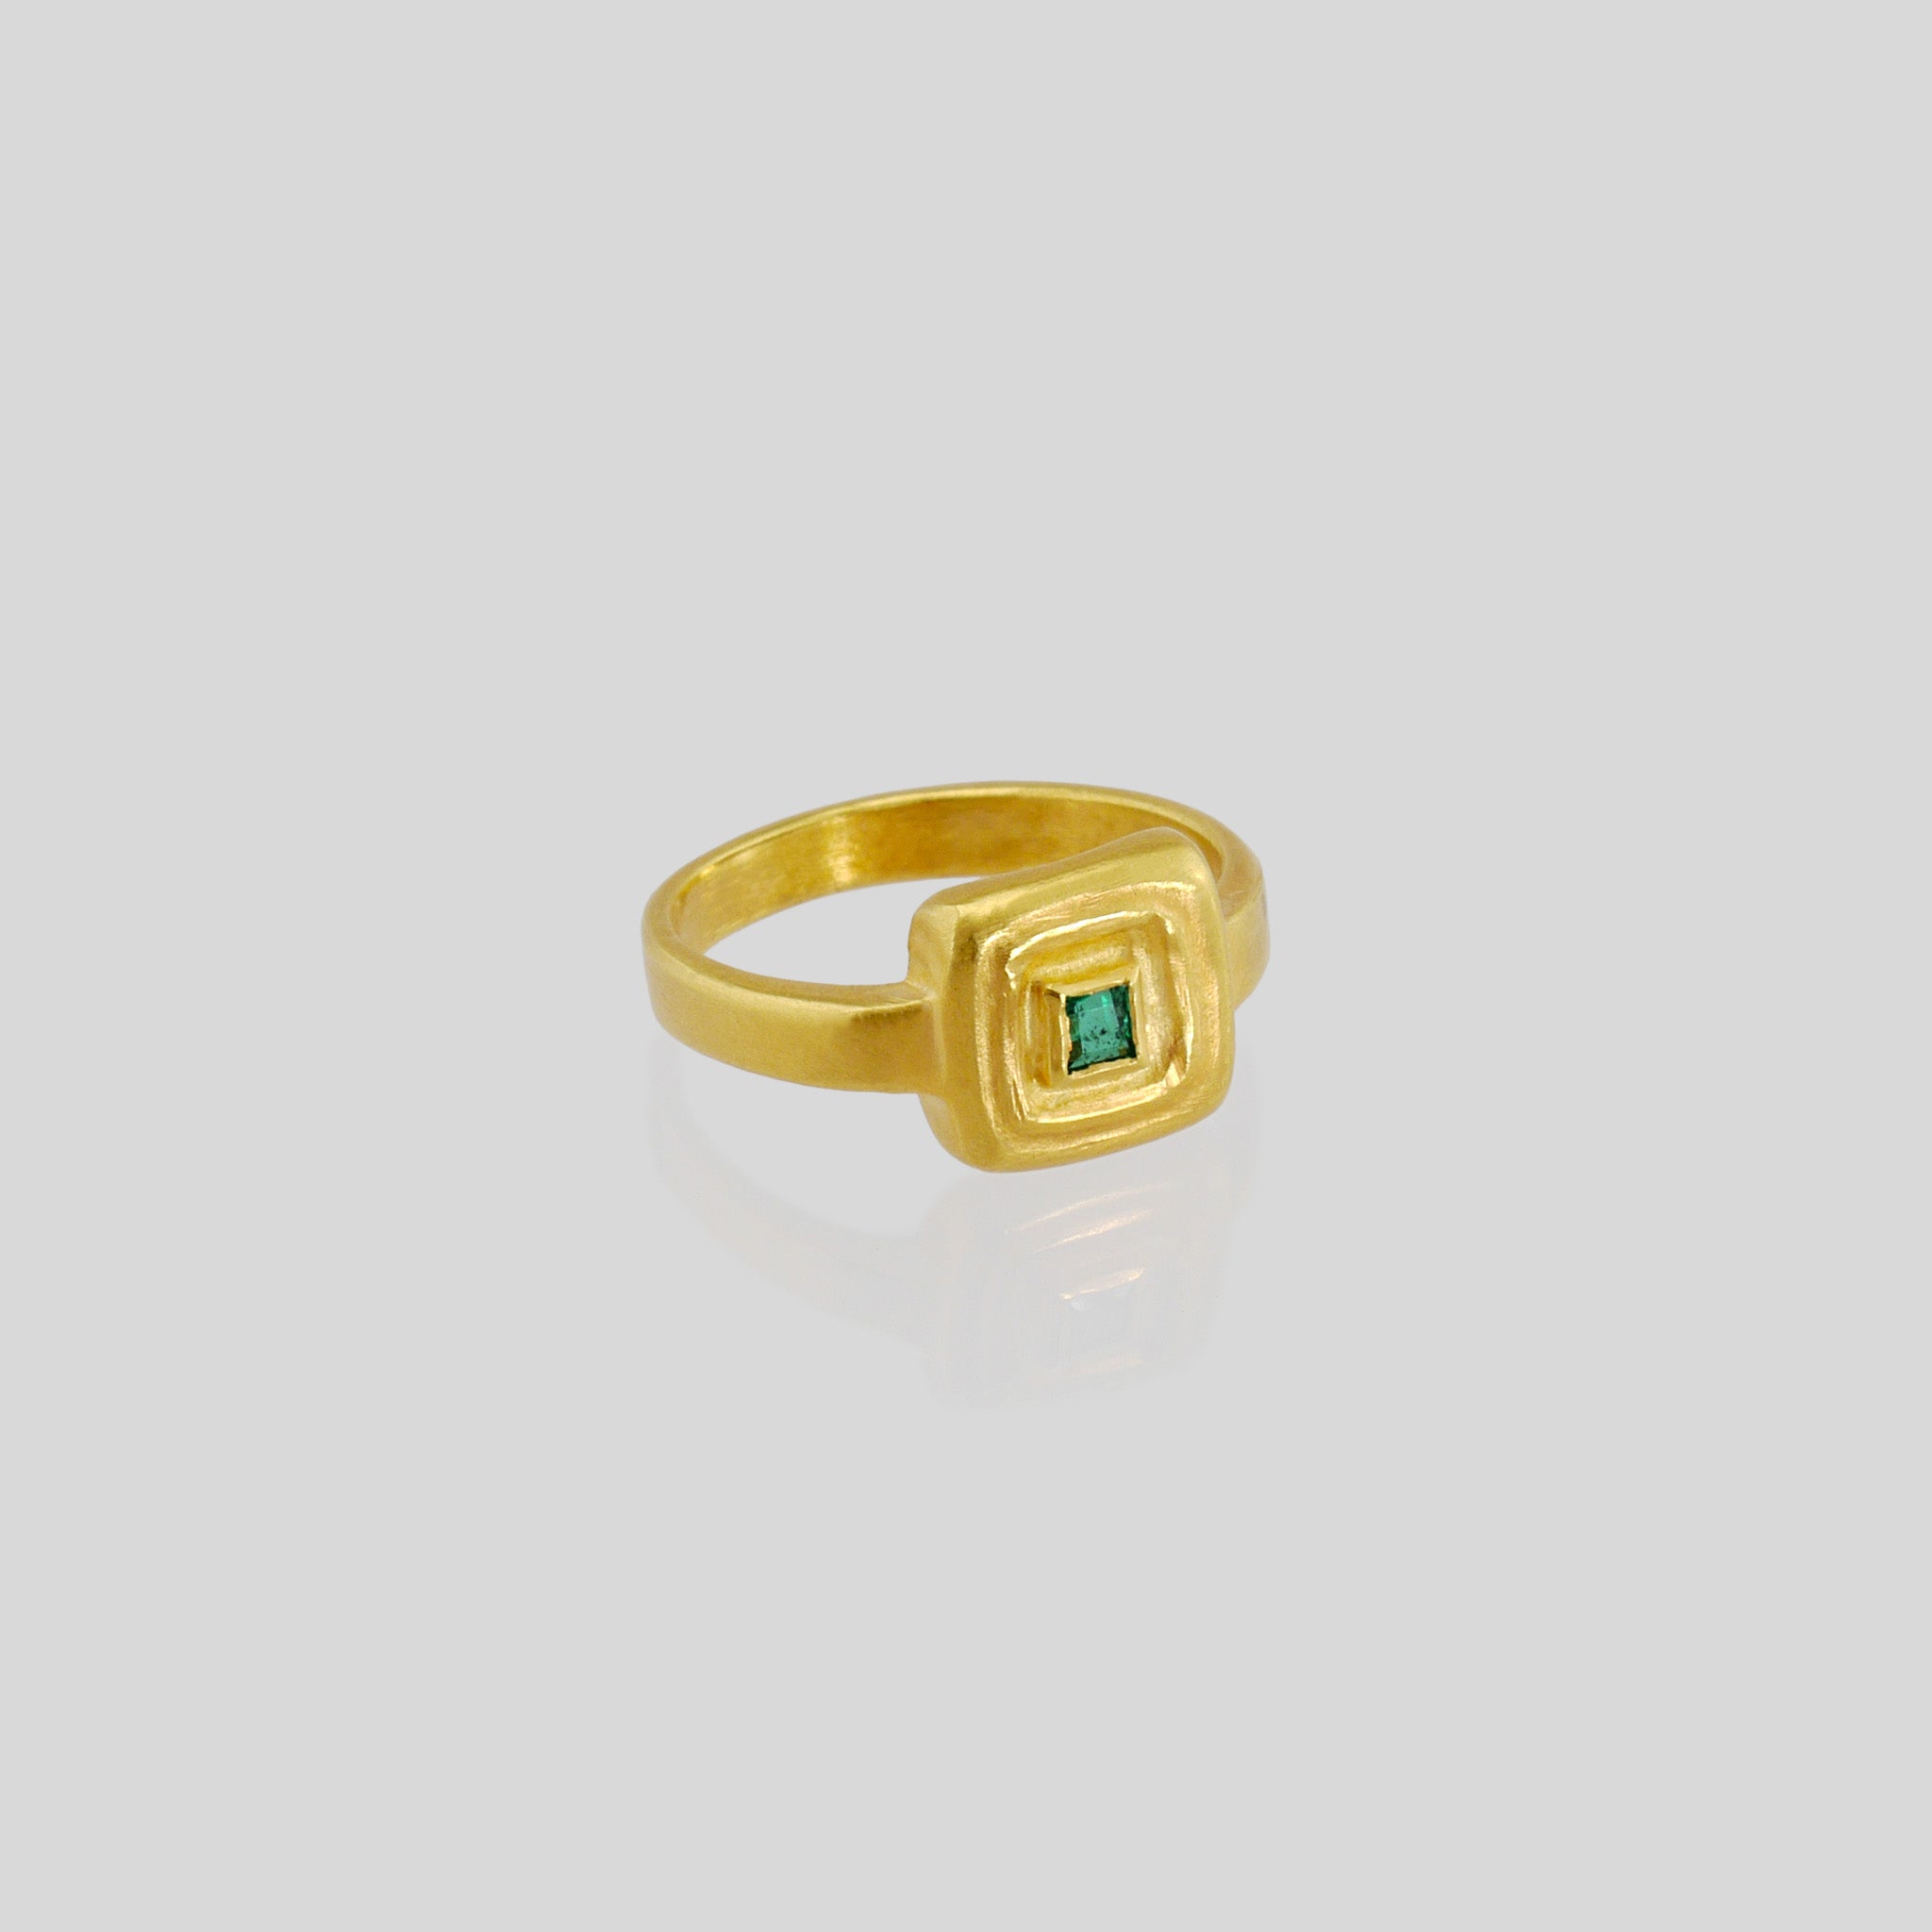 Handcrafted 18k Gold ring featuring a square Emerald set atop a square surface, evoking the ancient Egyptian era's golden jewelry of the Pharaohs.